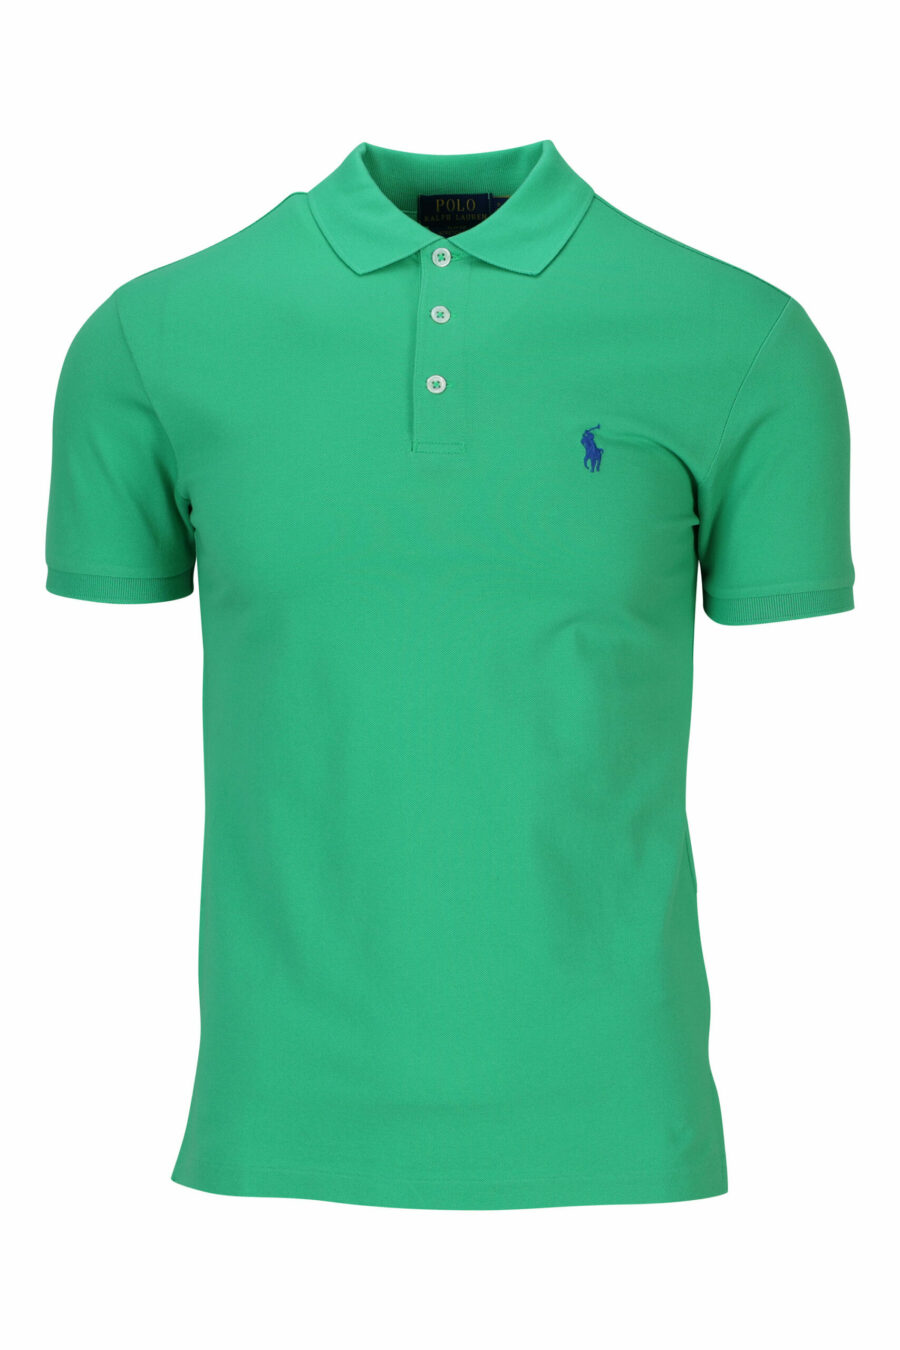 Green and blue T-shirt with mini-logo "polo" - 3616535909687 scaled